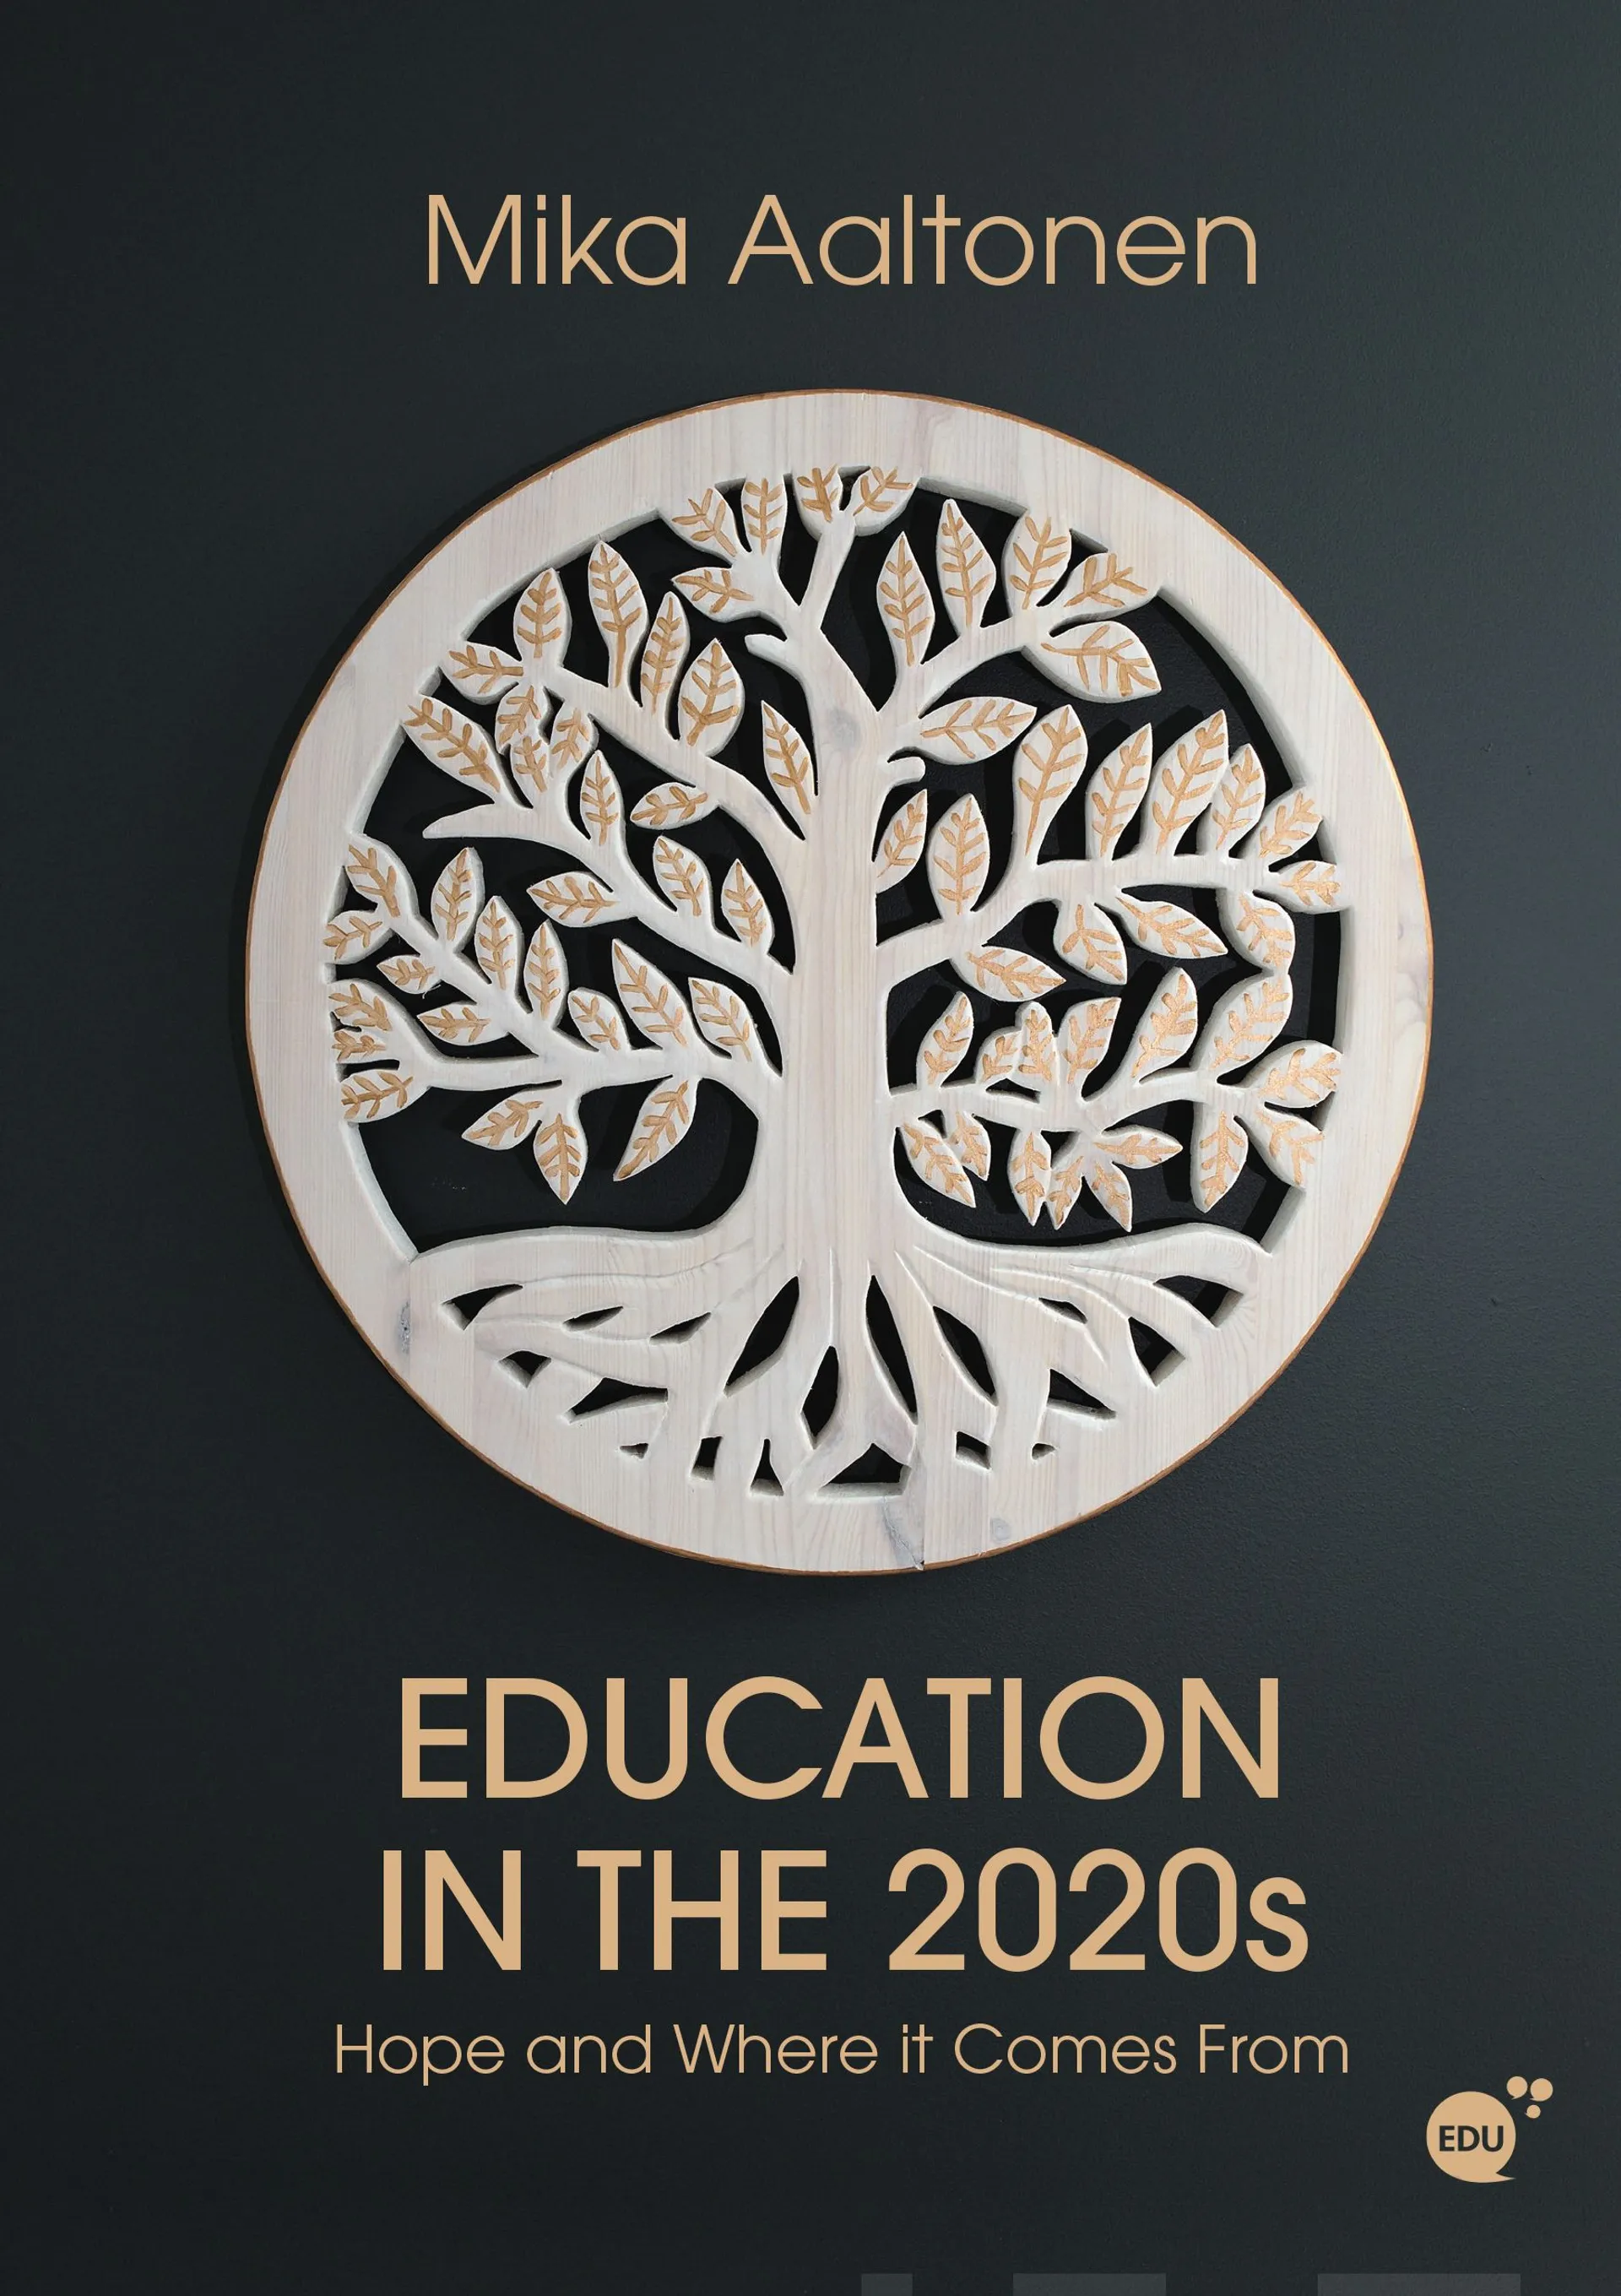 Aaltonen, Education in the 2020s - Hope and Where It Comes From